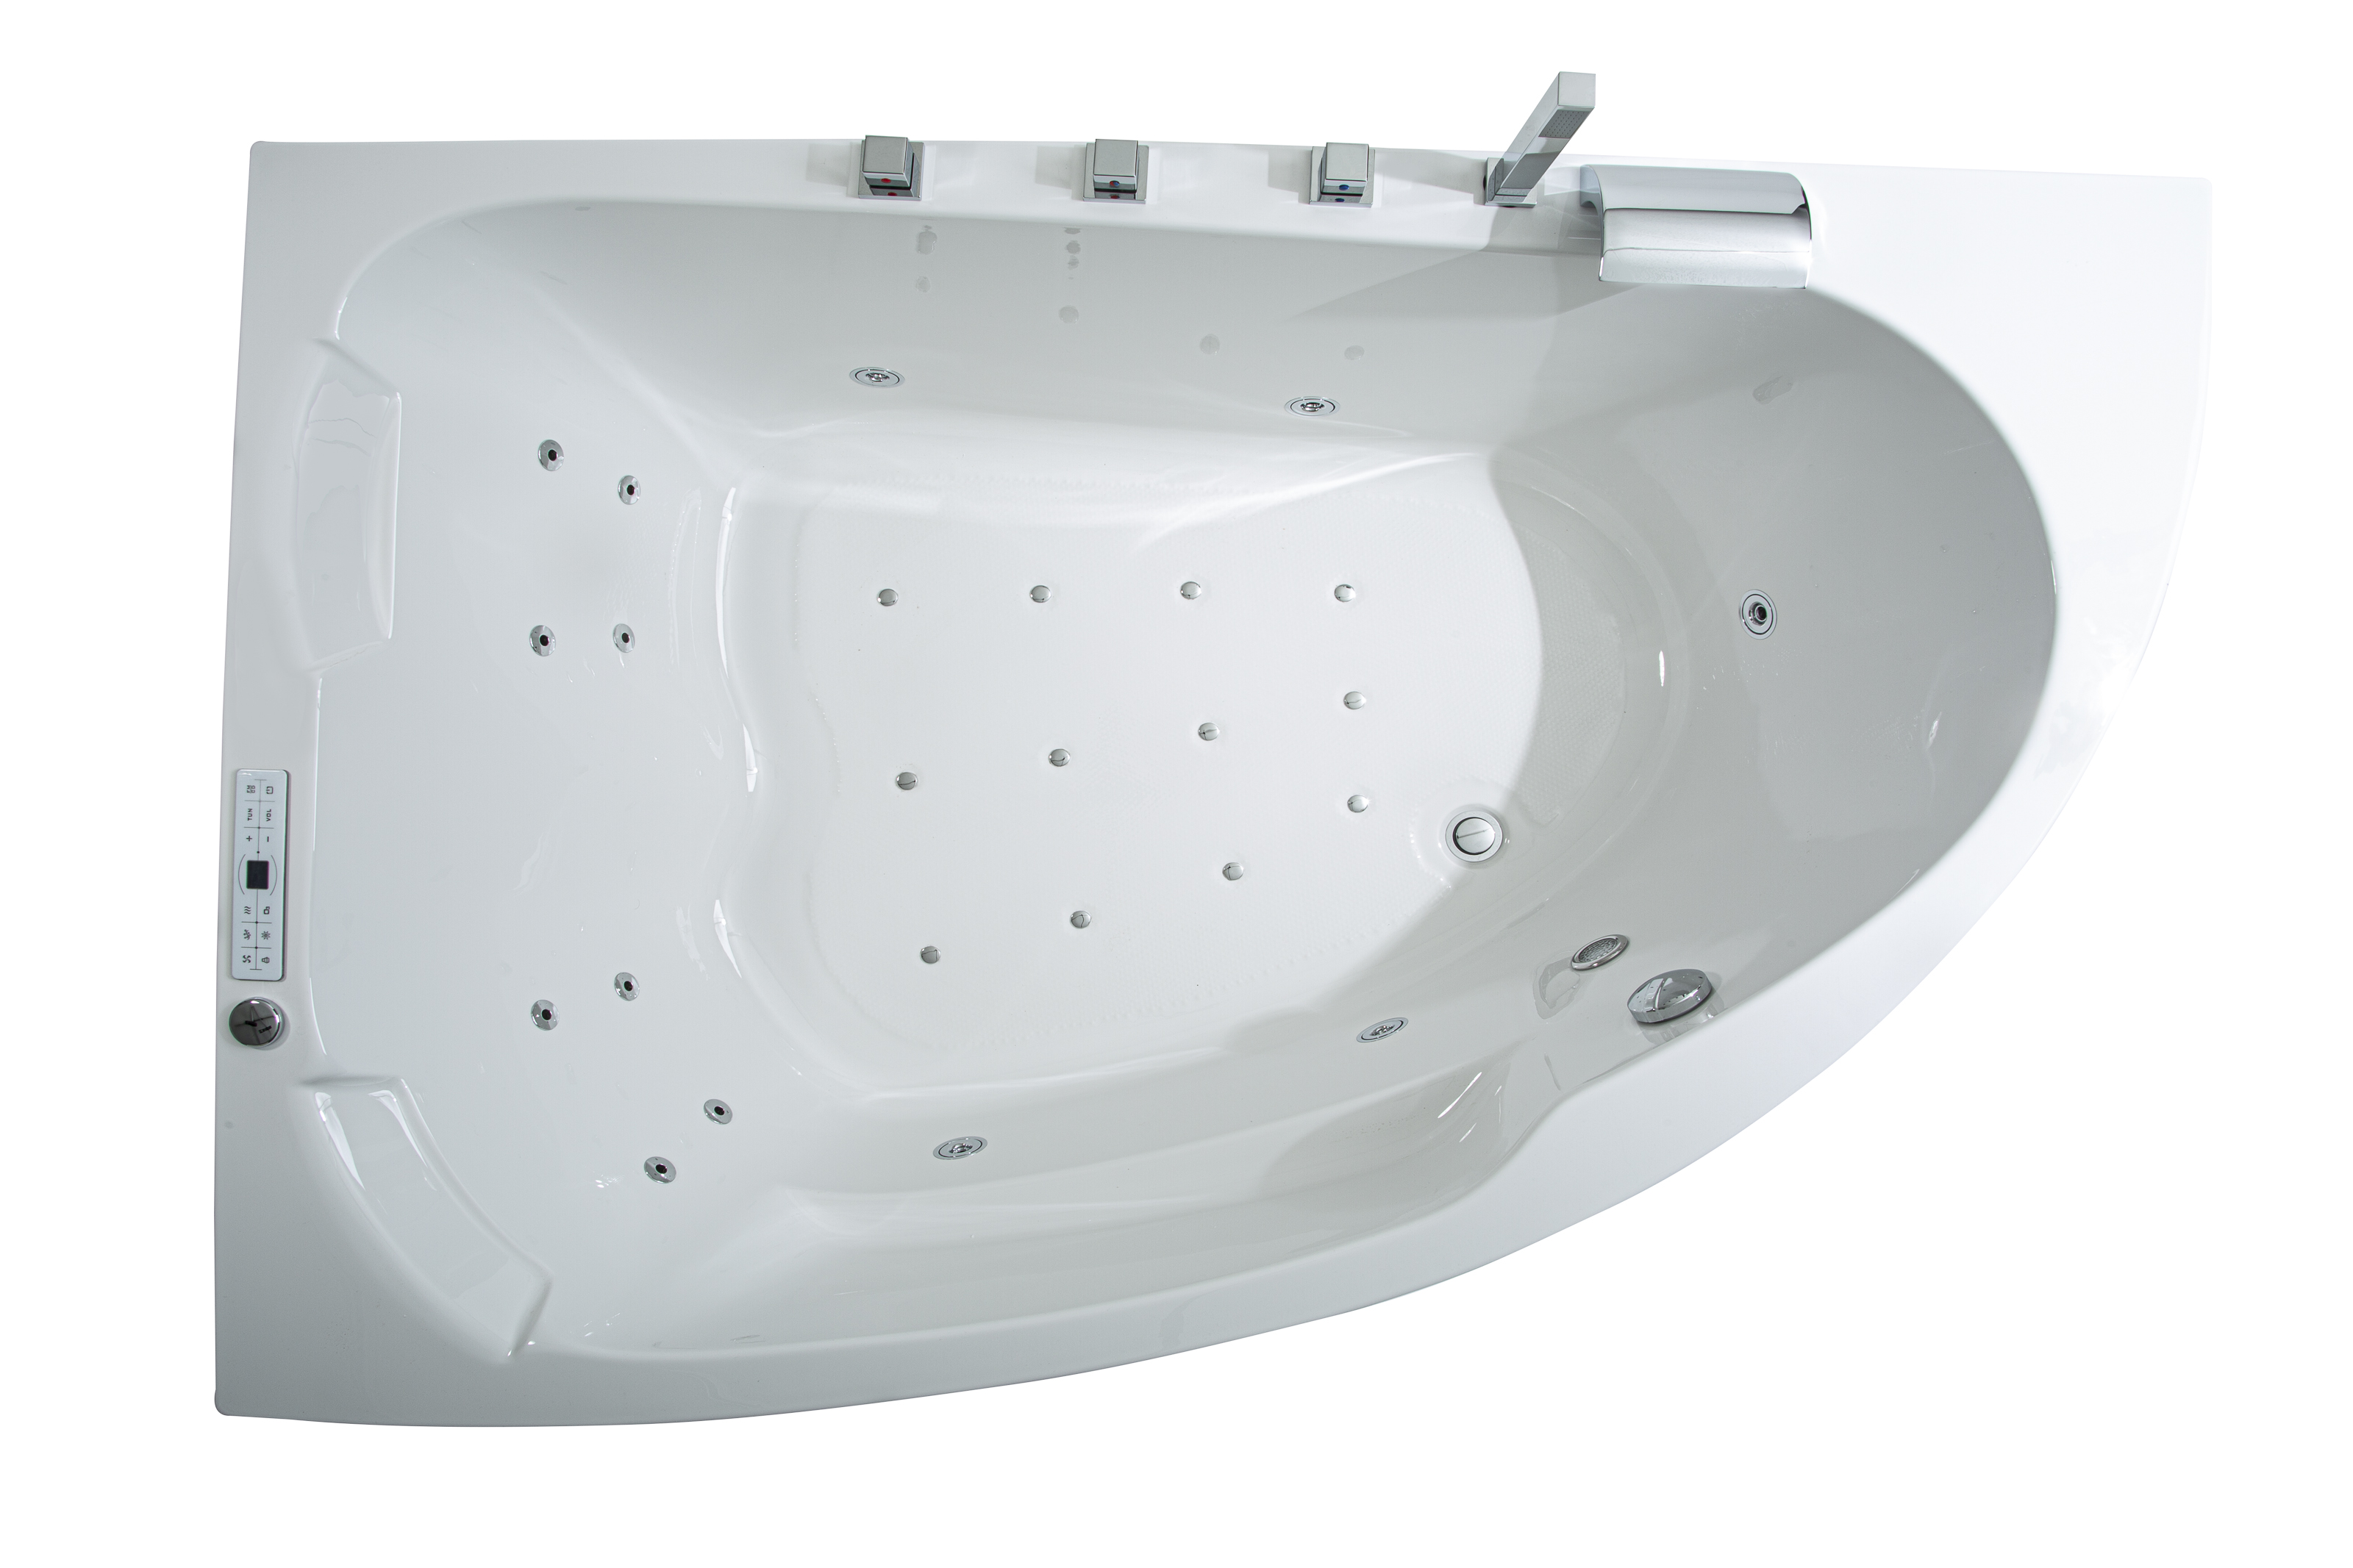 Baignoire d'angle Whirlpool Spa Bali Tulamben TWO Links 180x130 cm blanc MADE IN GERMANY